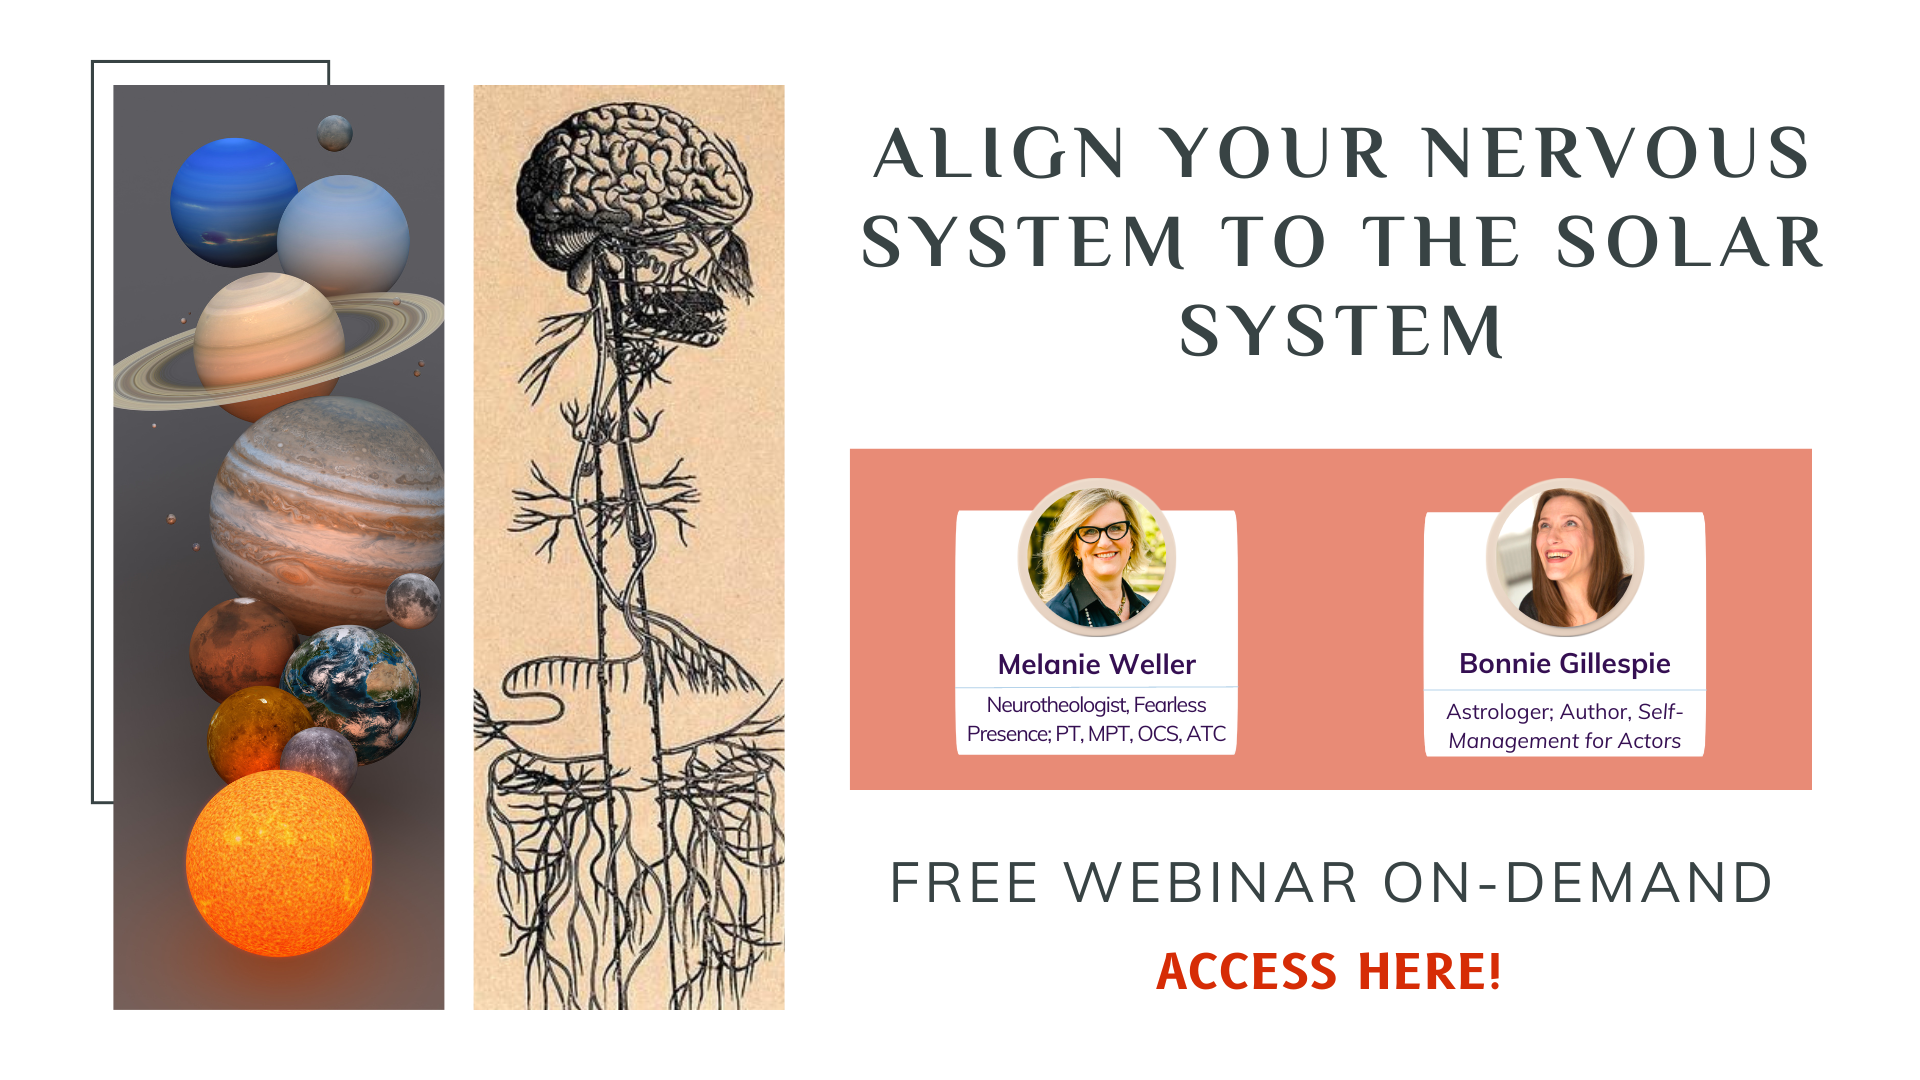 images of planets, image of the human nervous system, photos of Melanie Weller and Bonnie Gillespie, text about the free on-demand webinar